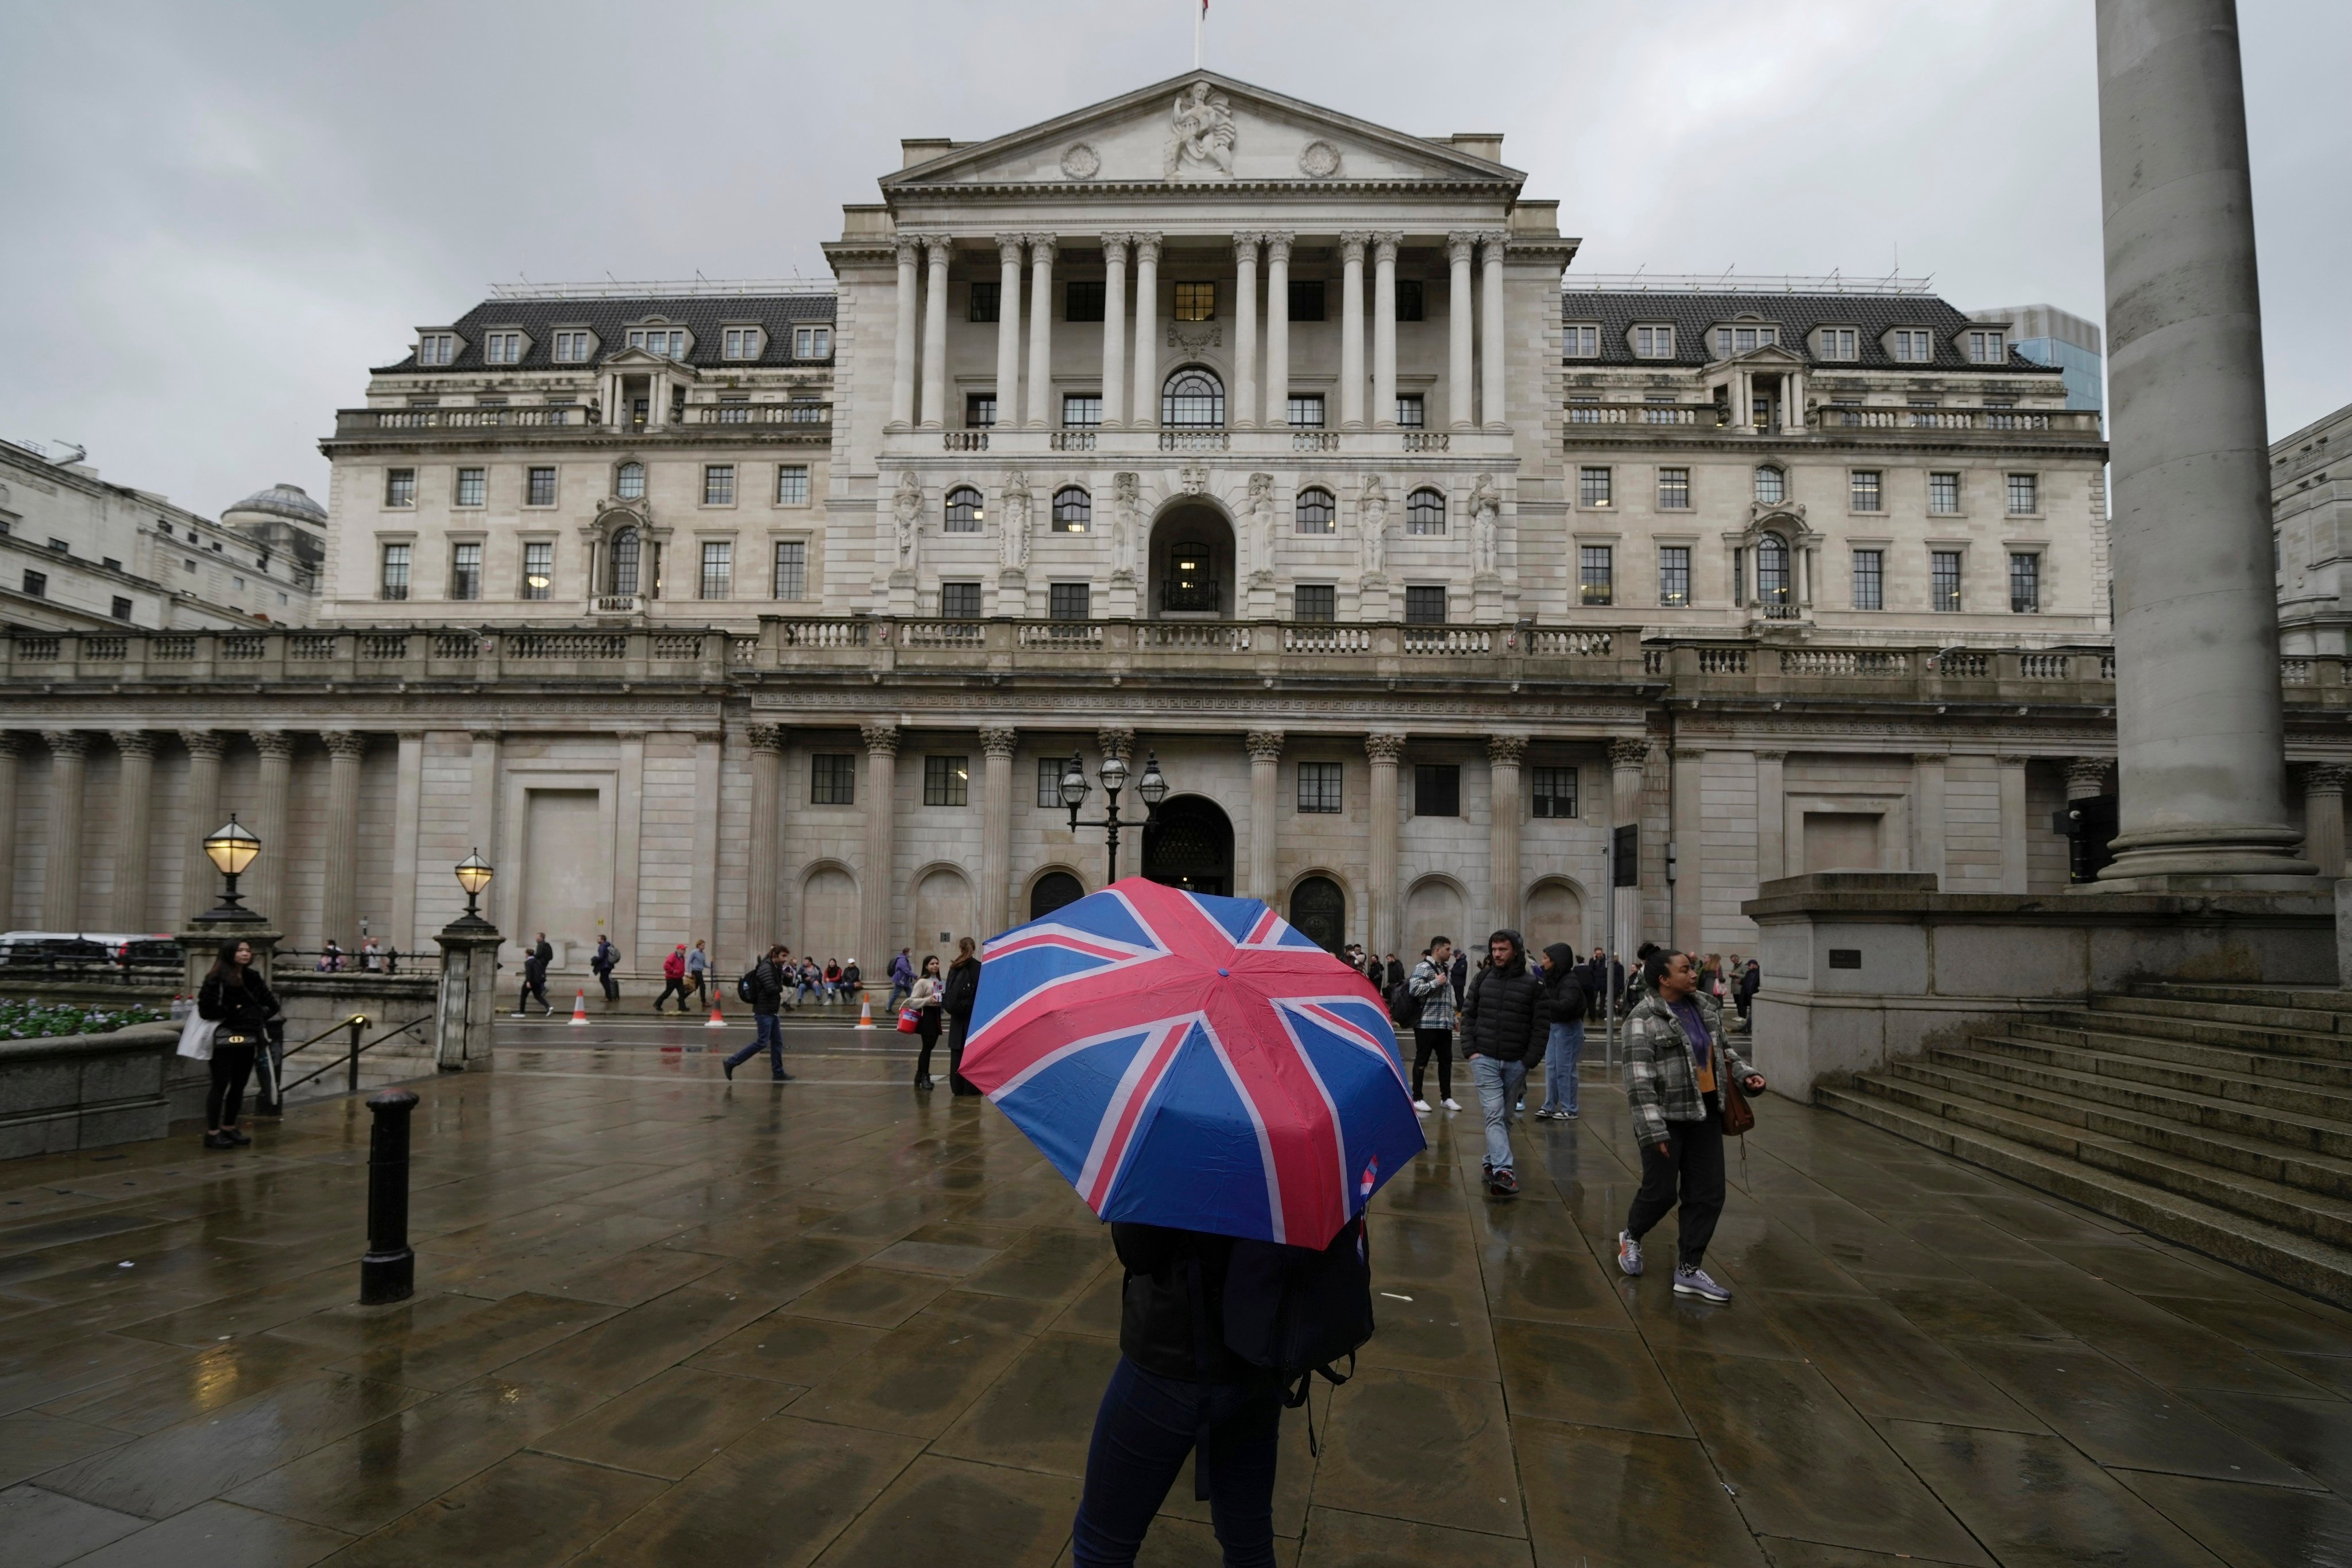 The Bank of England in the City of London. The banks have the opportunity to respond to the provisional findings before the CMA makes its final decision in the matter. Photo: AP